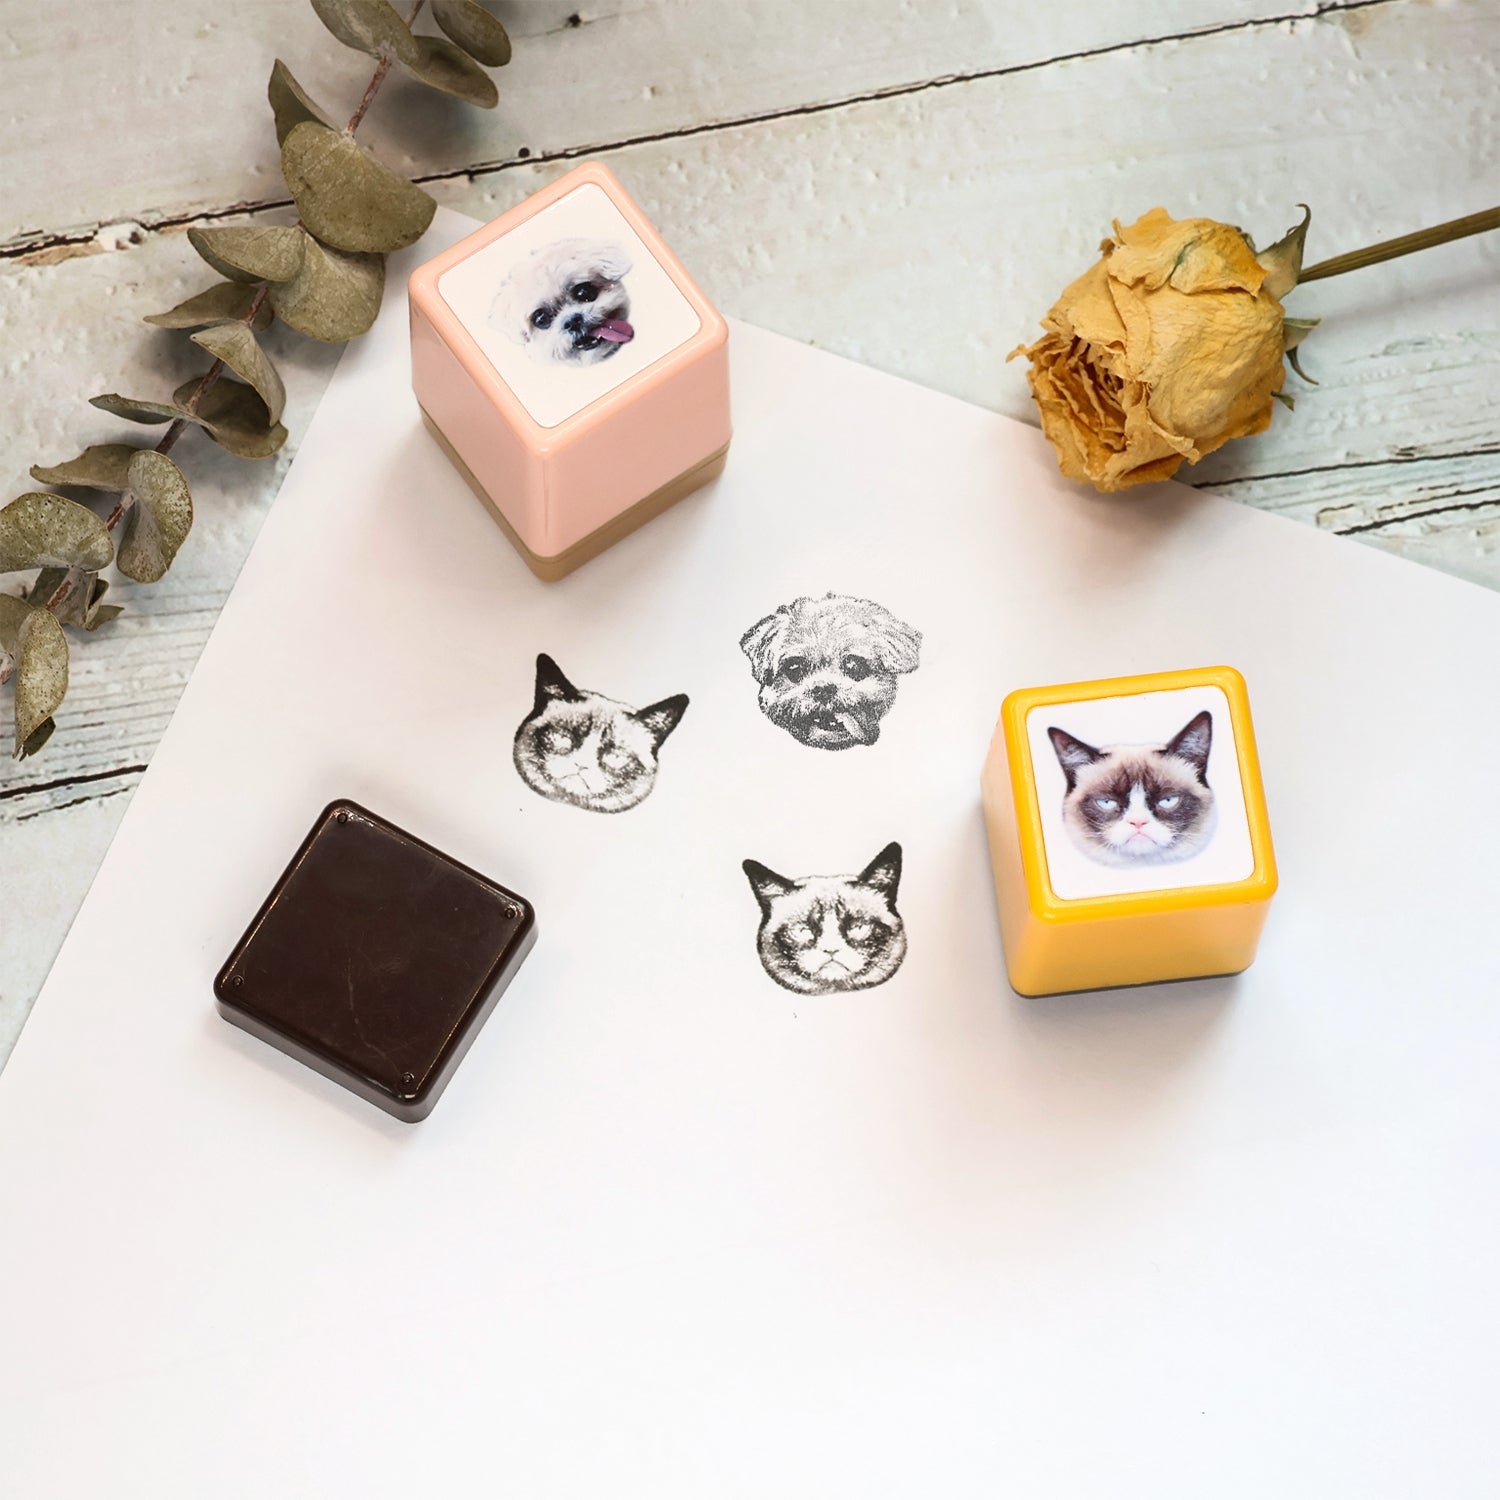 Custom Pet Head Portrait Stamp, Custom Cat & Dog Stamp From Photo, Personalize Stamp on Assignments, Kids Stamp, Valentine's Day Gift 12